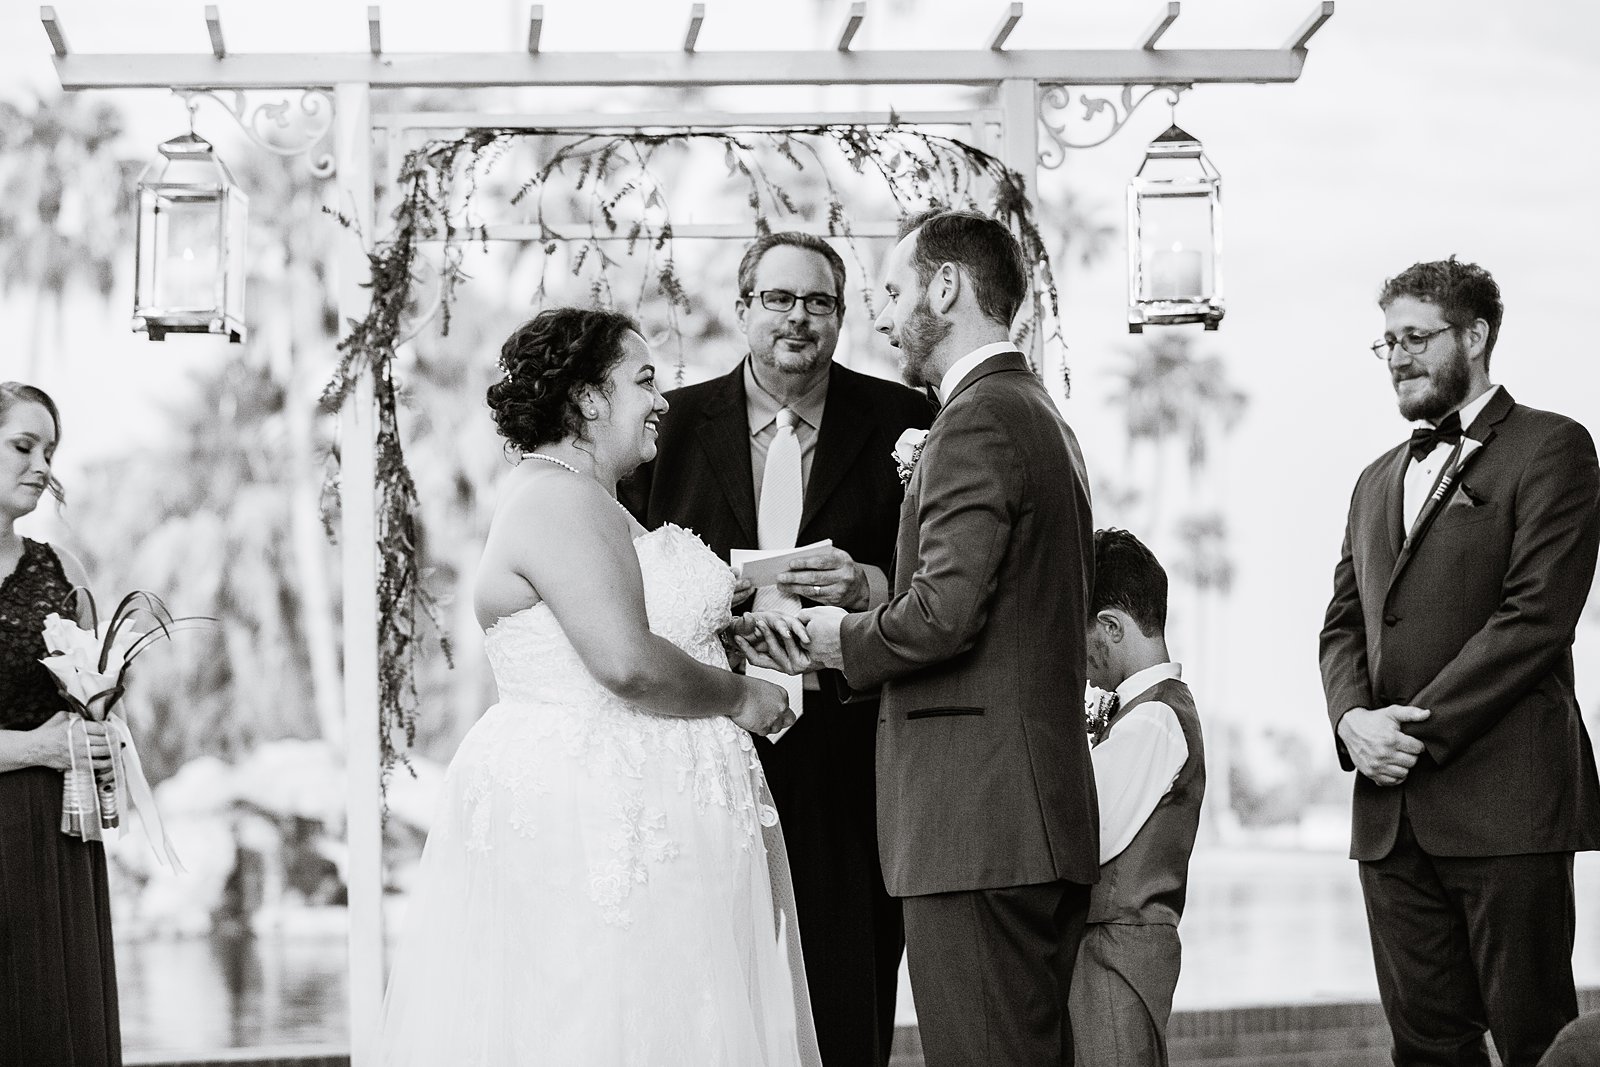 Bride and groom exchange rings during their wedding ceremony at Encanto Park by Arizona wedding photographer PMA Photography.